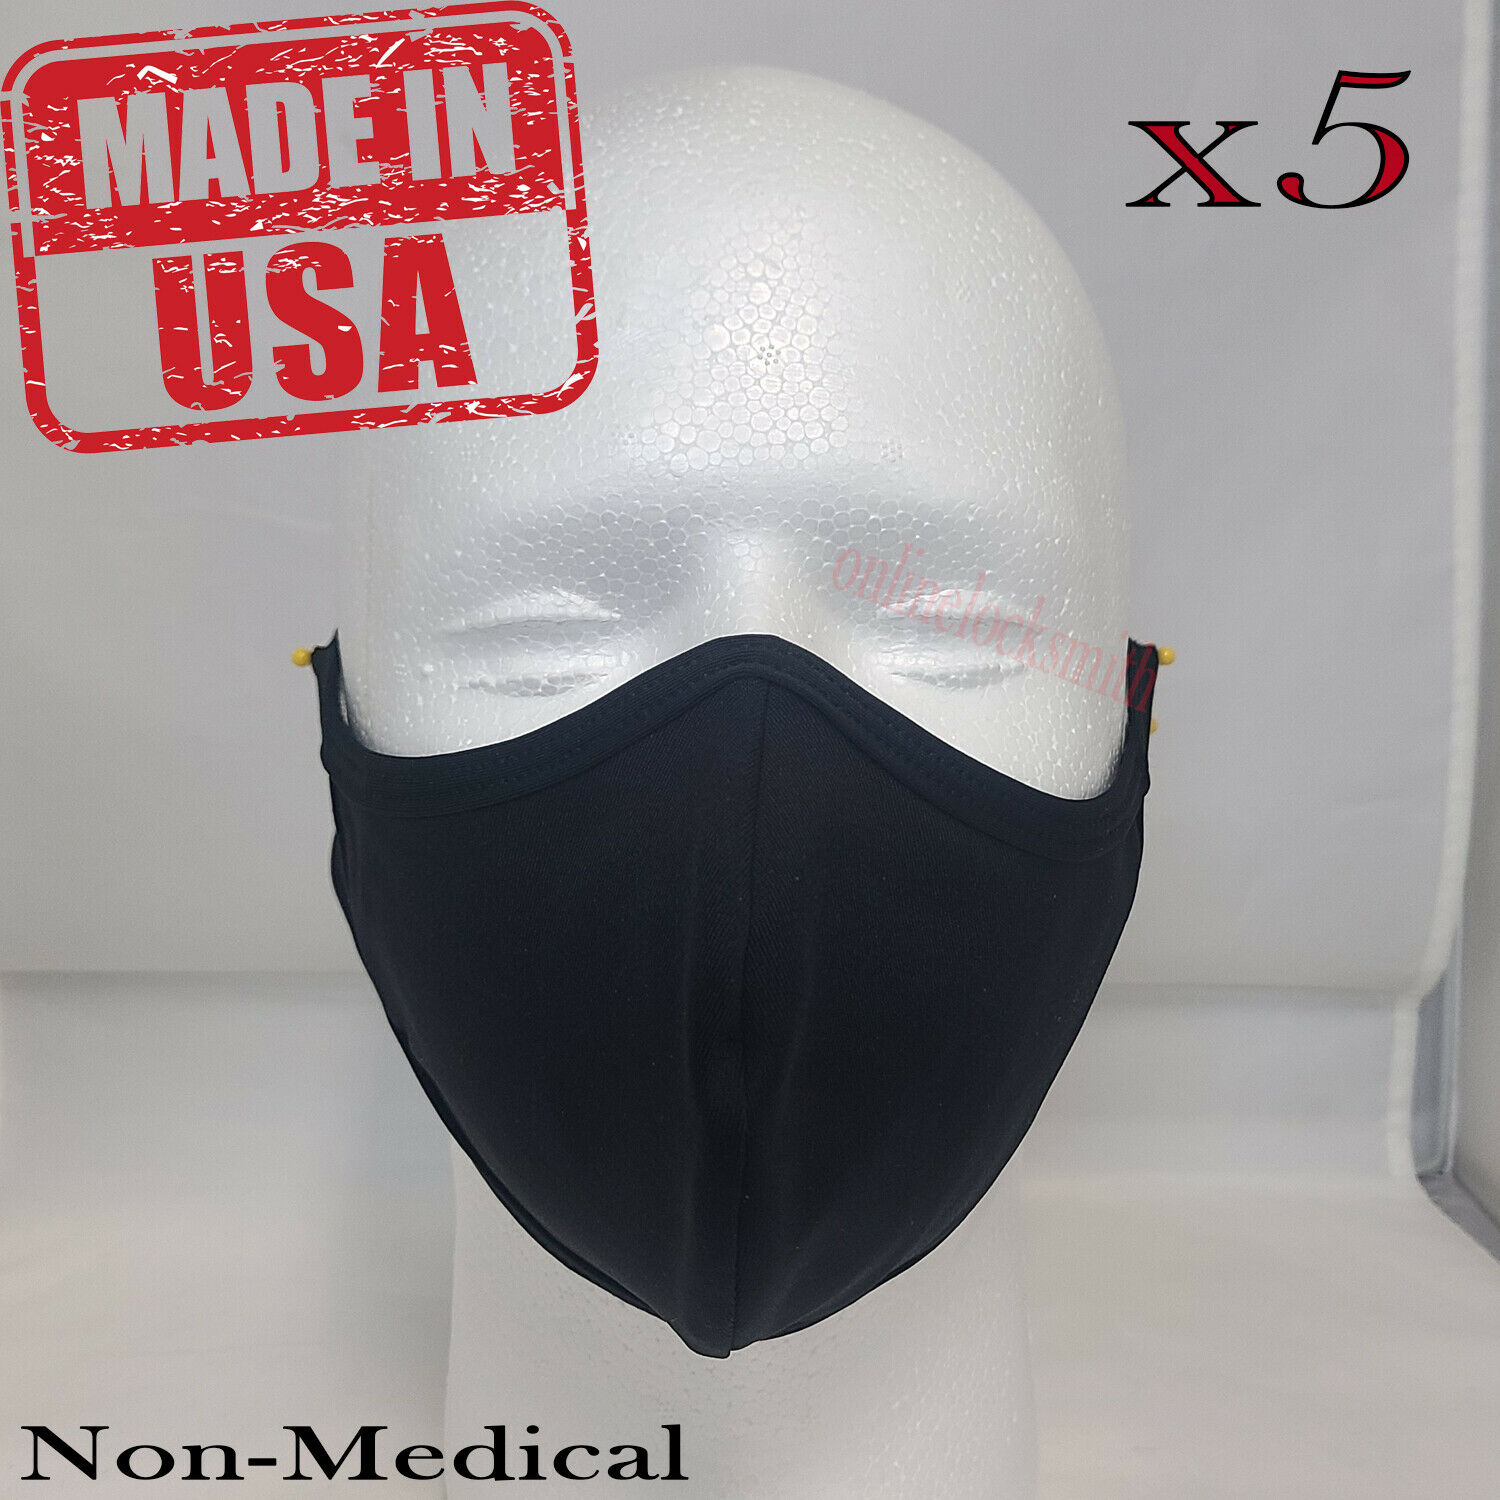 5x Face Mask Washable/Reusable Soft Double Layer Fabric Professional USA Made - image 1 of 5